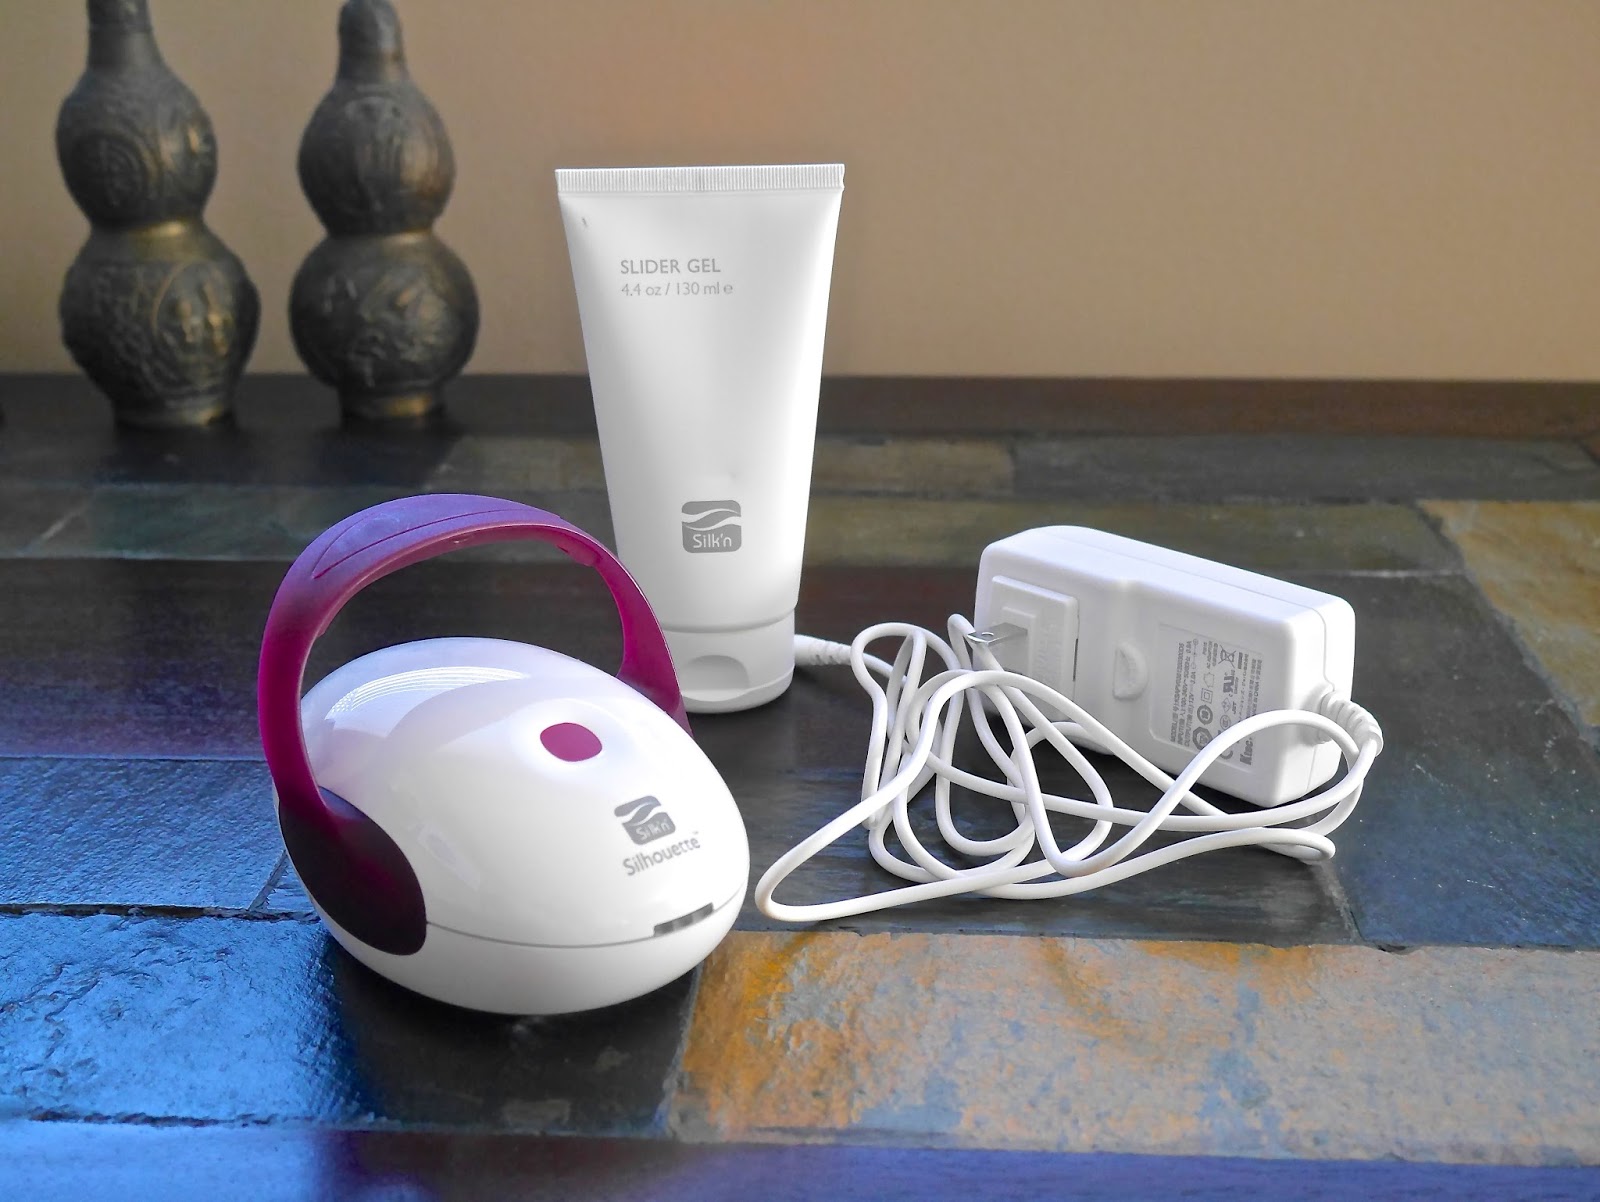 The Ultimate Body Contouring System